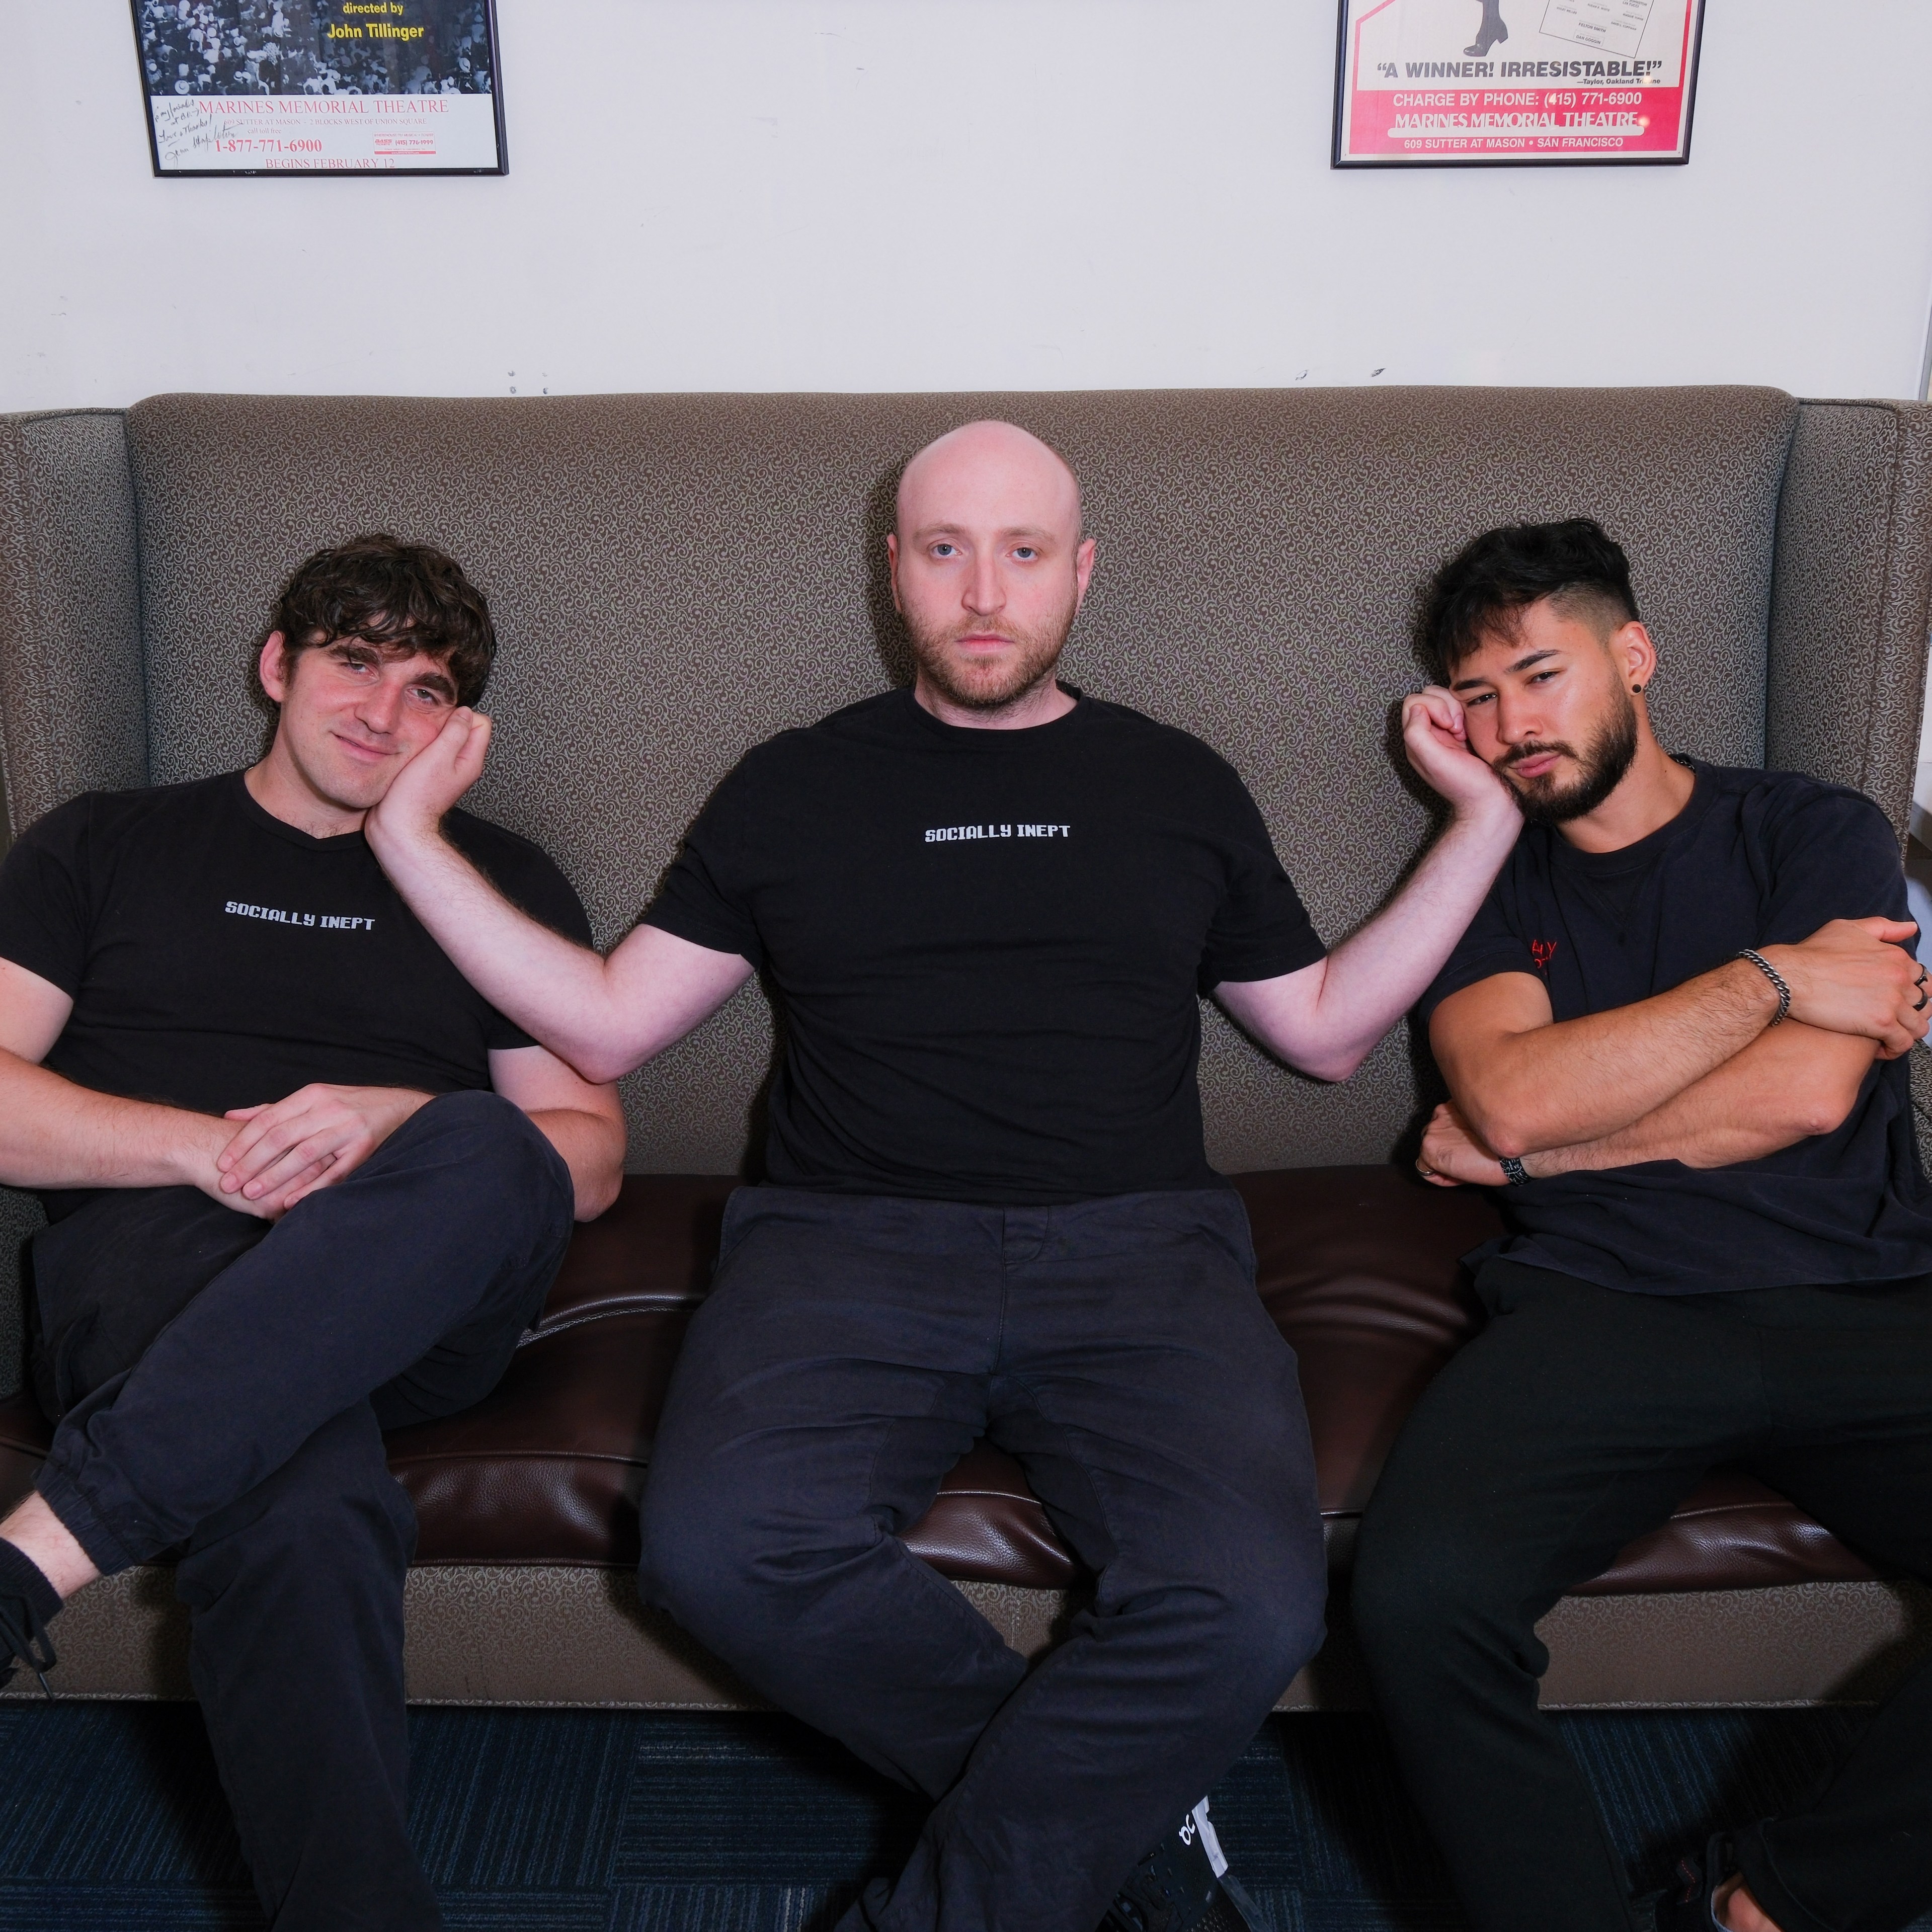 Three men sit on a couch. The man in the middle, wearing a black &quot;SOCIALLY INEPT&quot; shirt, cups the faces of the two men on either side of him, who also wear black.